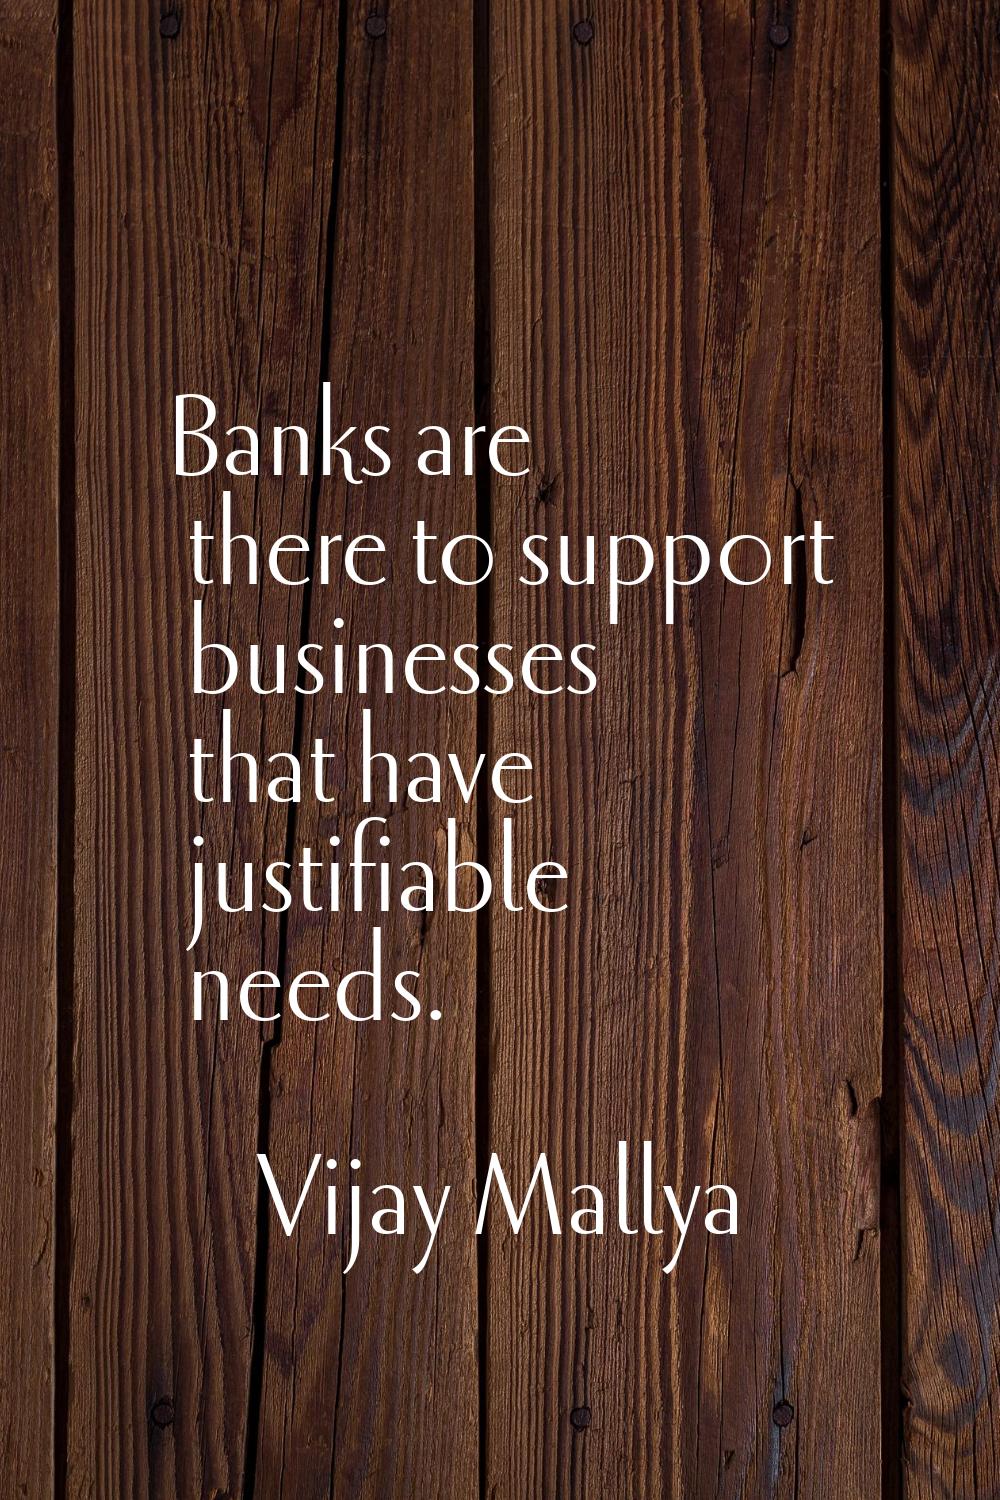 Banks are there to support businesses that have justifiable needs.